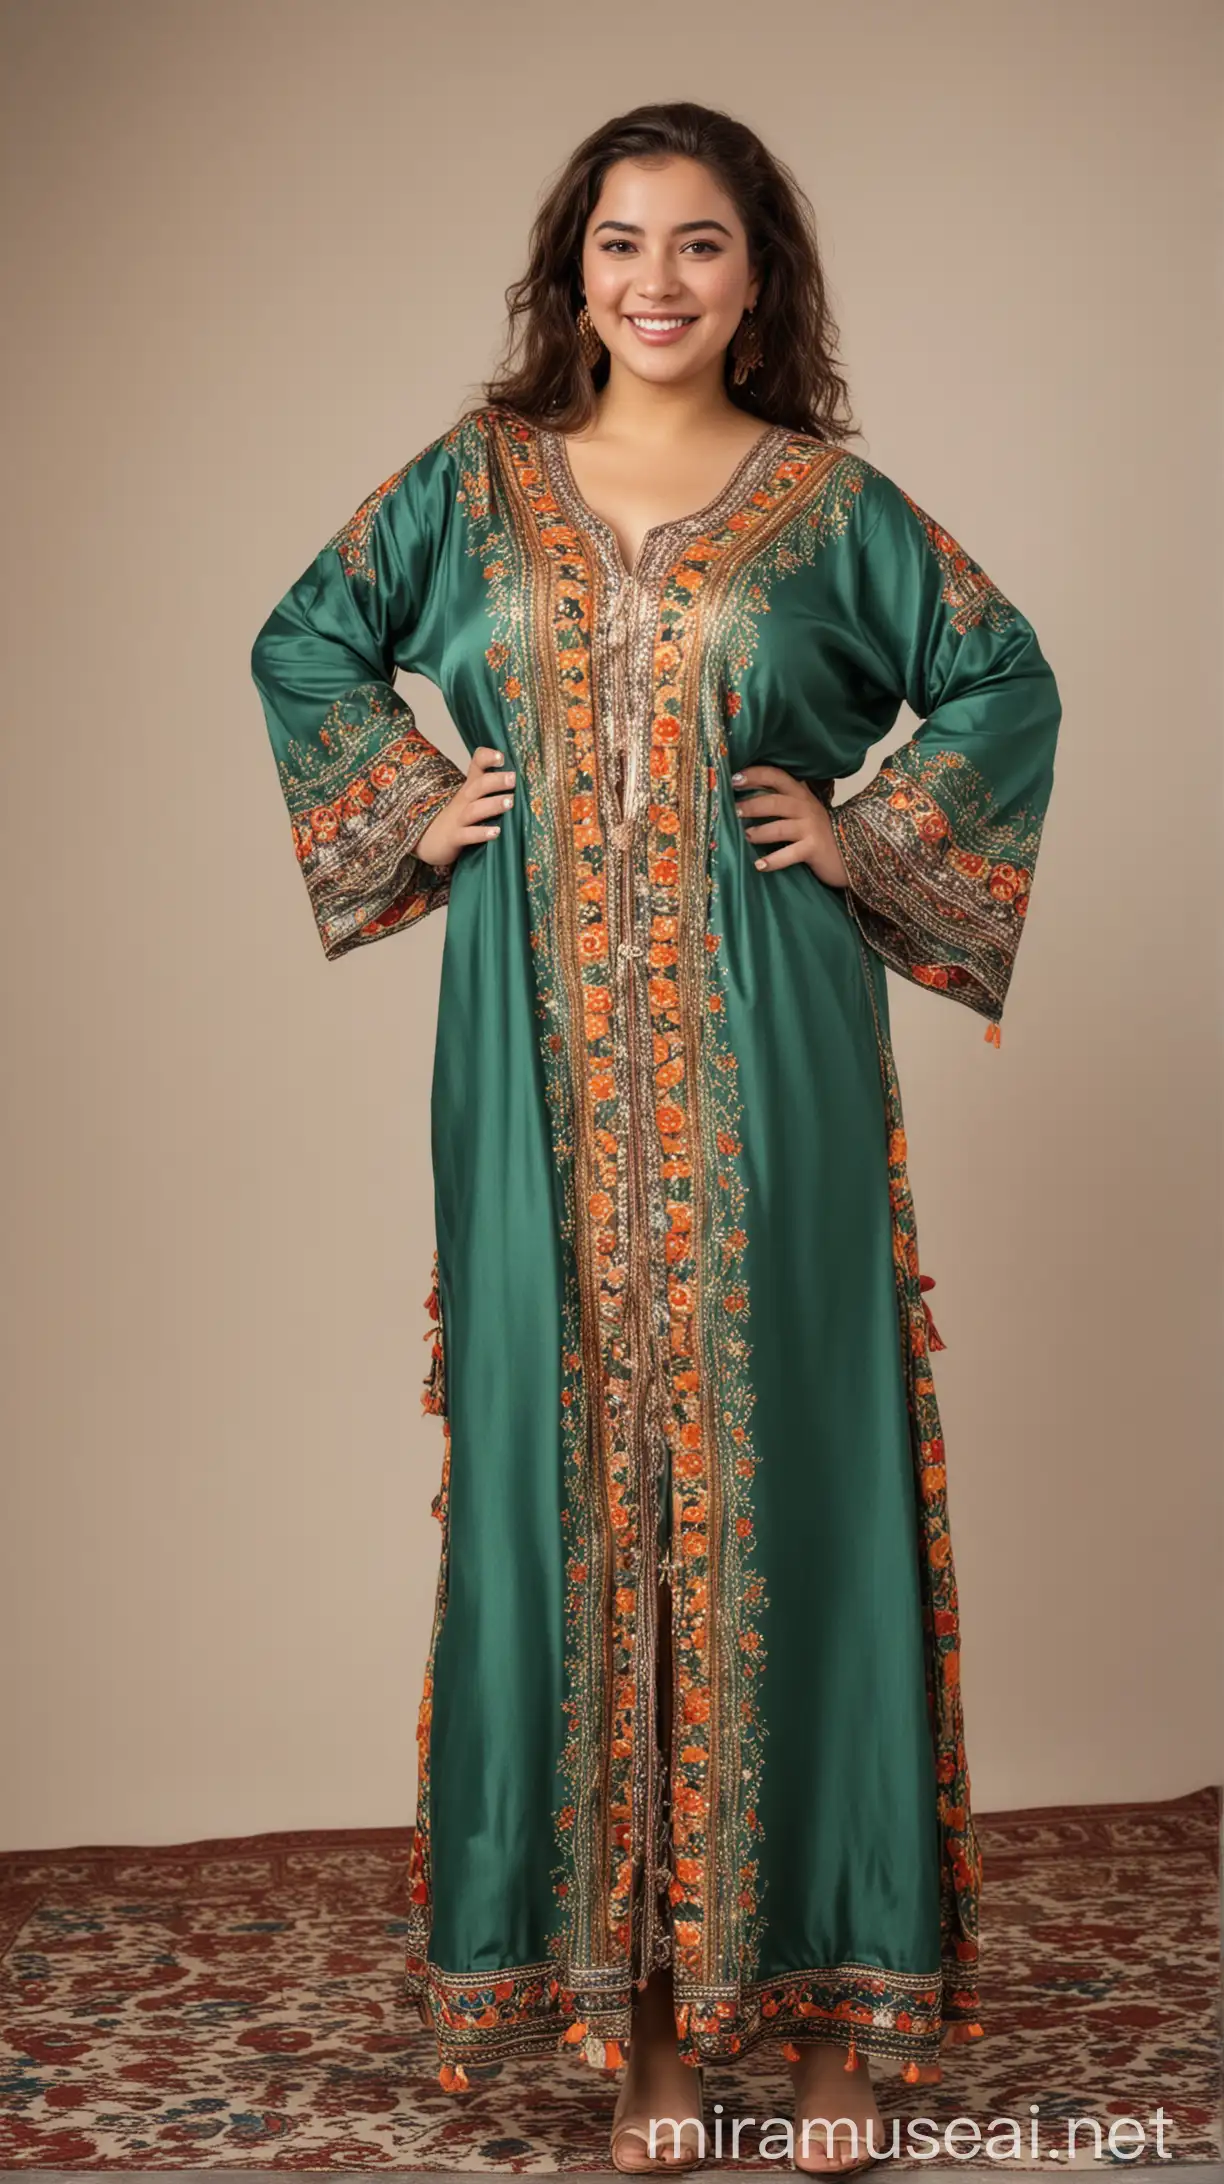  Plus size, beautiful,full body of an algerian woman, smiling, and dressed in a conservative  algerian  traditional caftan , looking lovingly at a brunette woman